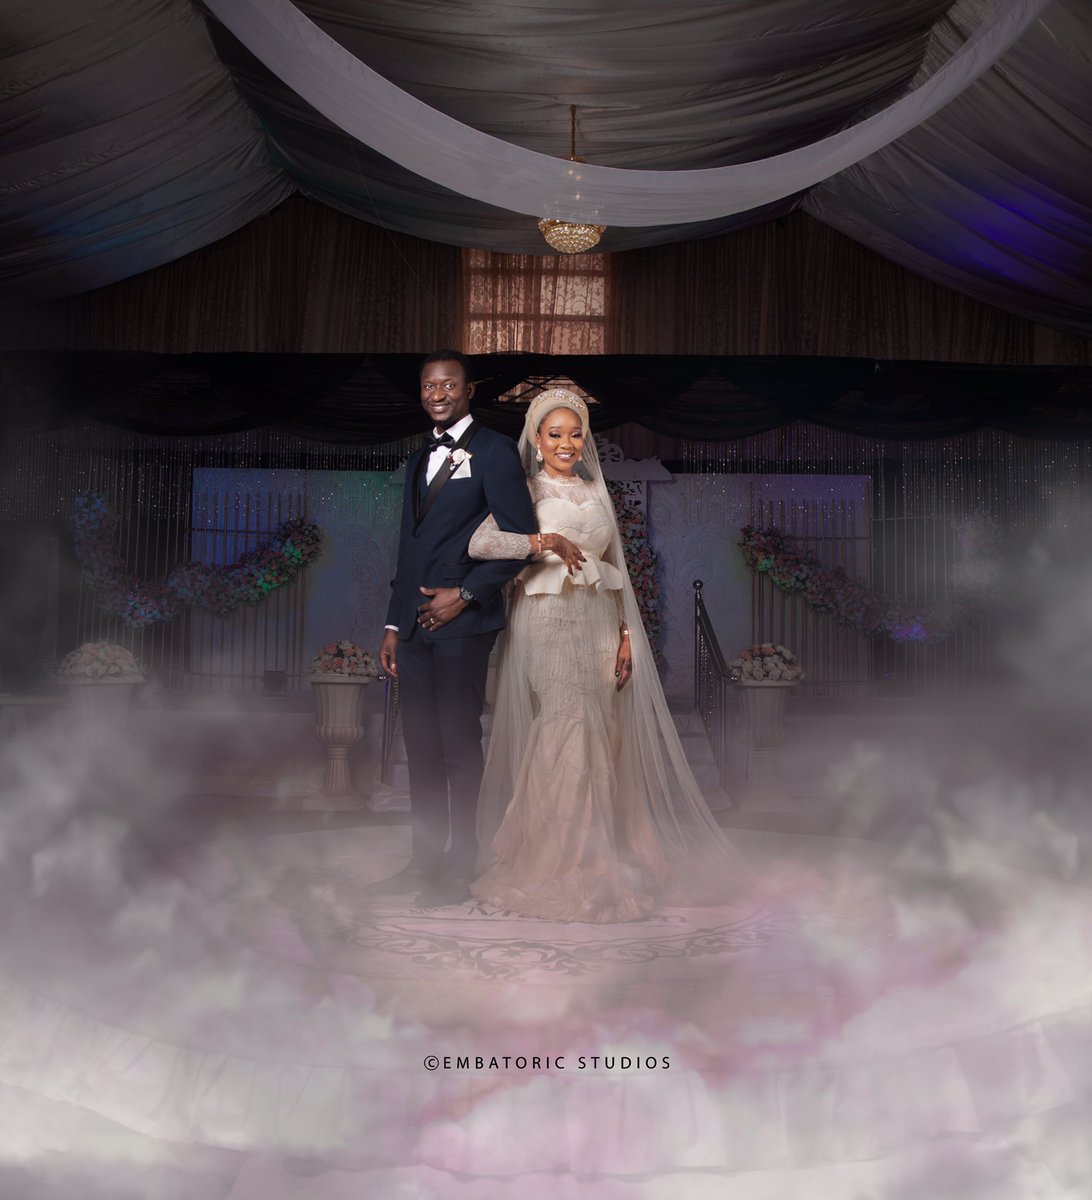 It’s a promise, if we handle your wedding, divorce will never be an option… Amen.

Let’s handle your events in style today, we have affordable packages for every class.

Follow us on I.g
@embatoric_weddingsandevents for content